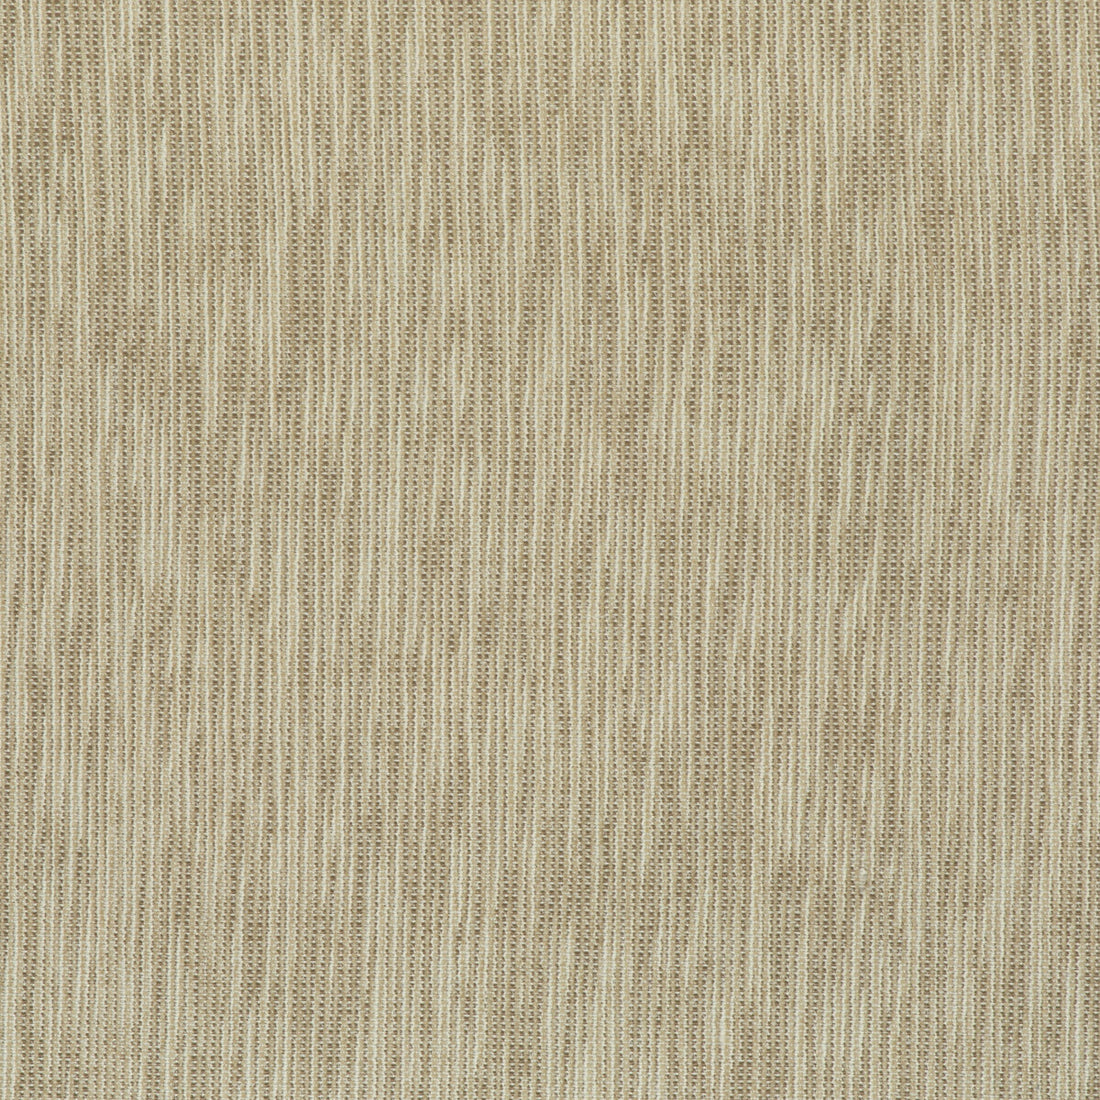 Standford fabric in linen color - pattern 33406.16.0 - by Kravet Basics